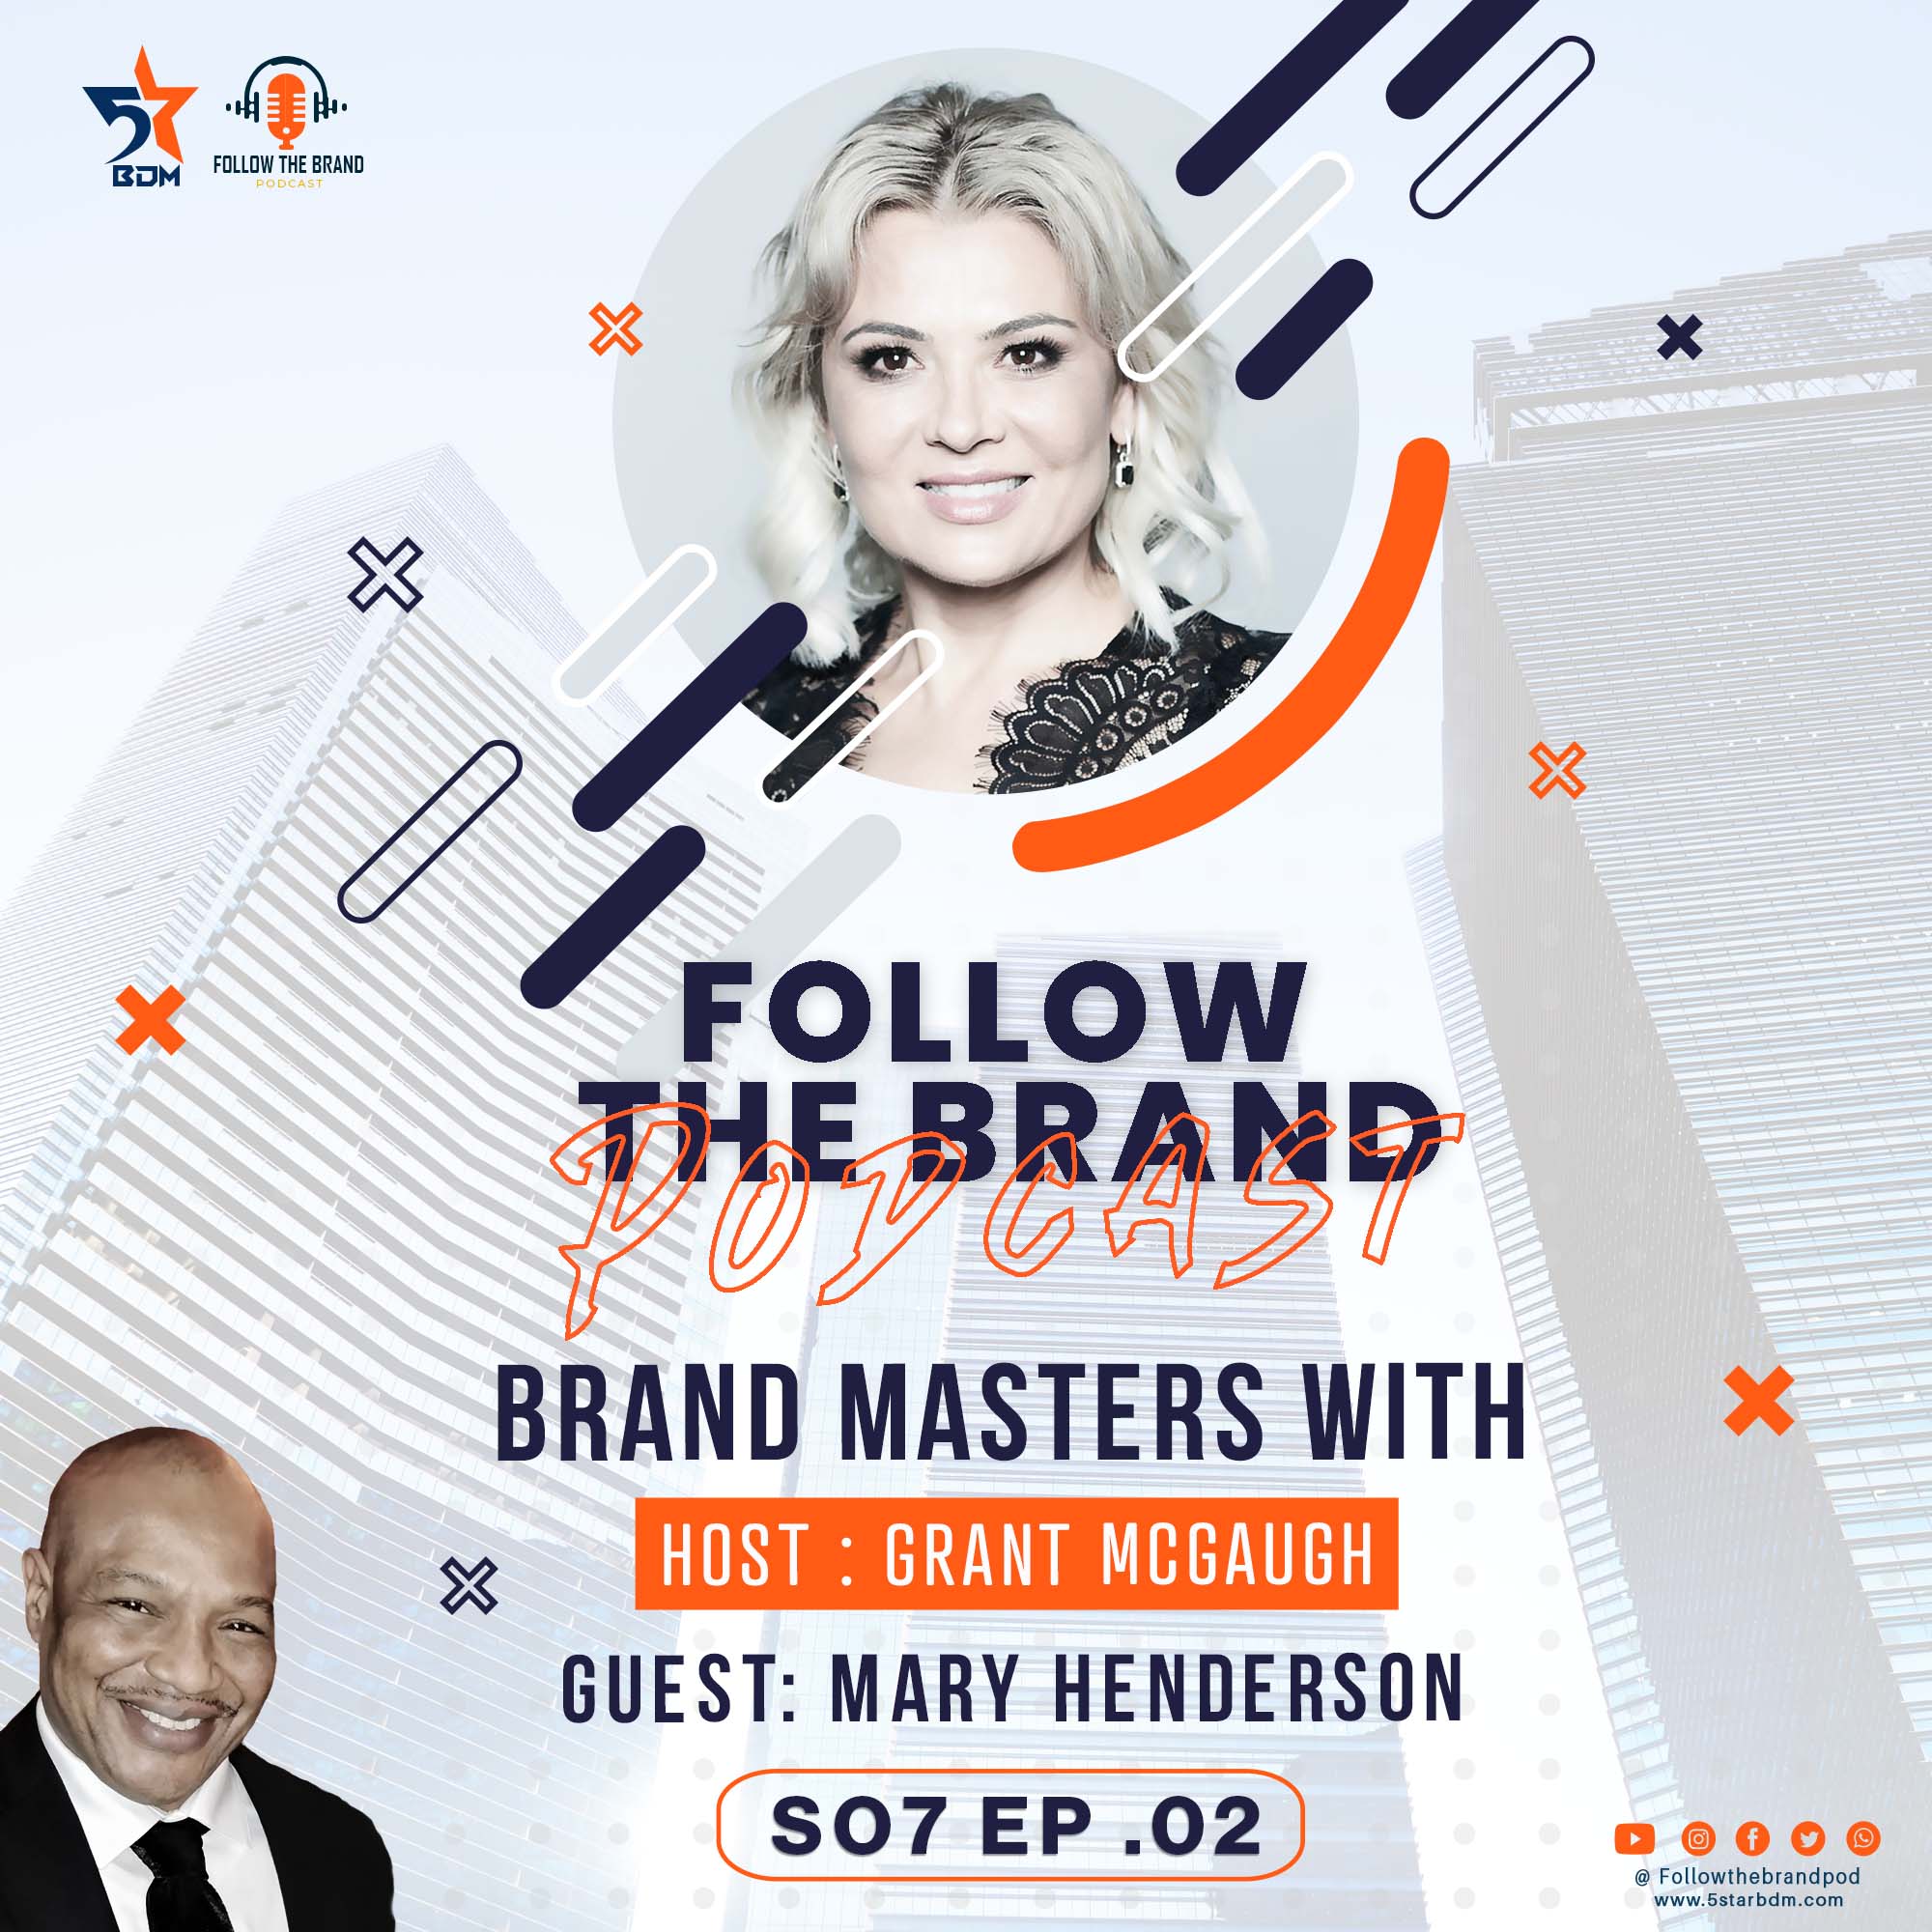 Commercializing Personal Brand with Mary Henderson